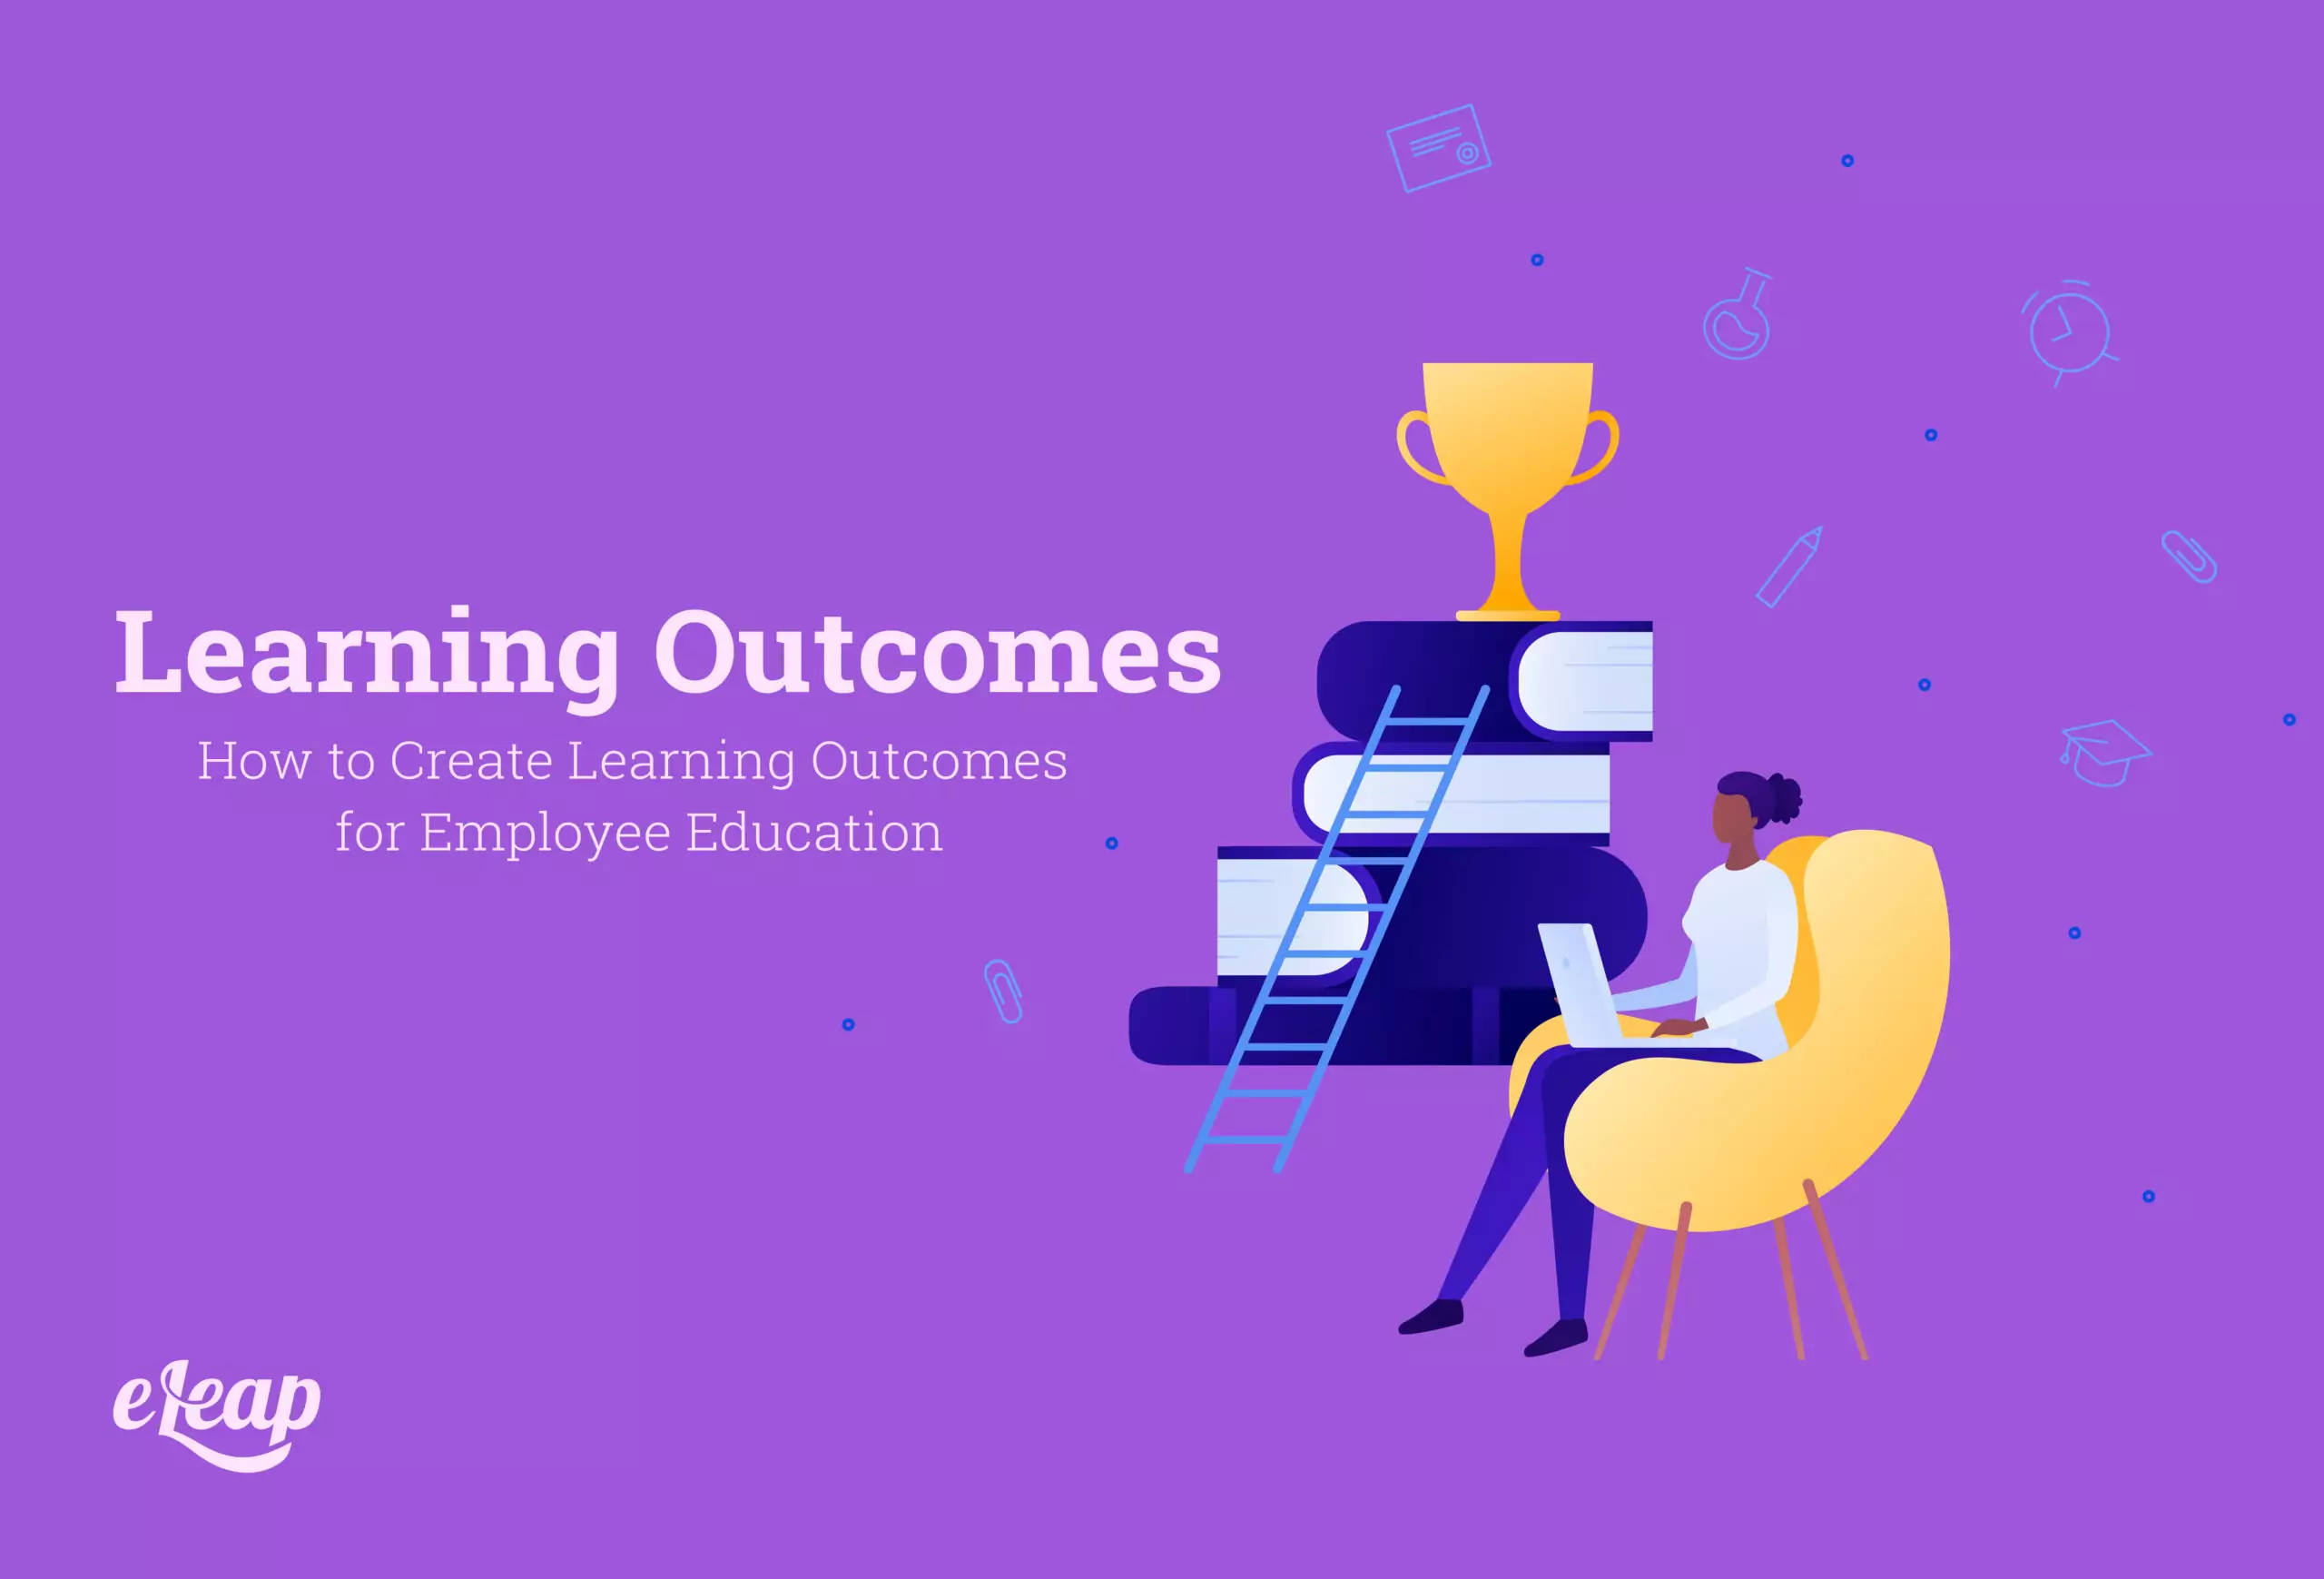 Learning Outcomes